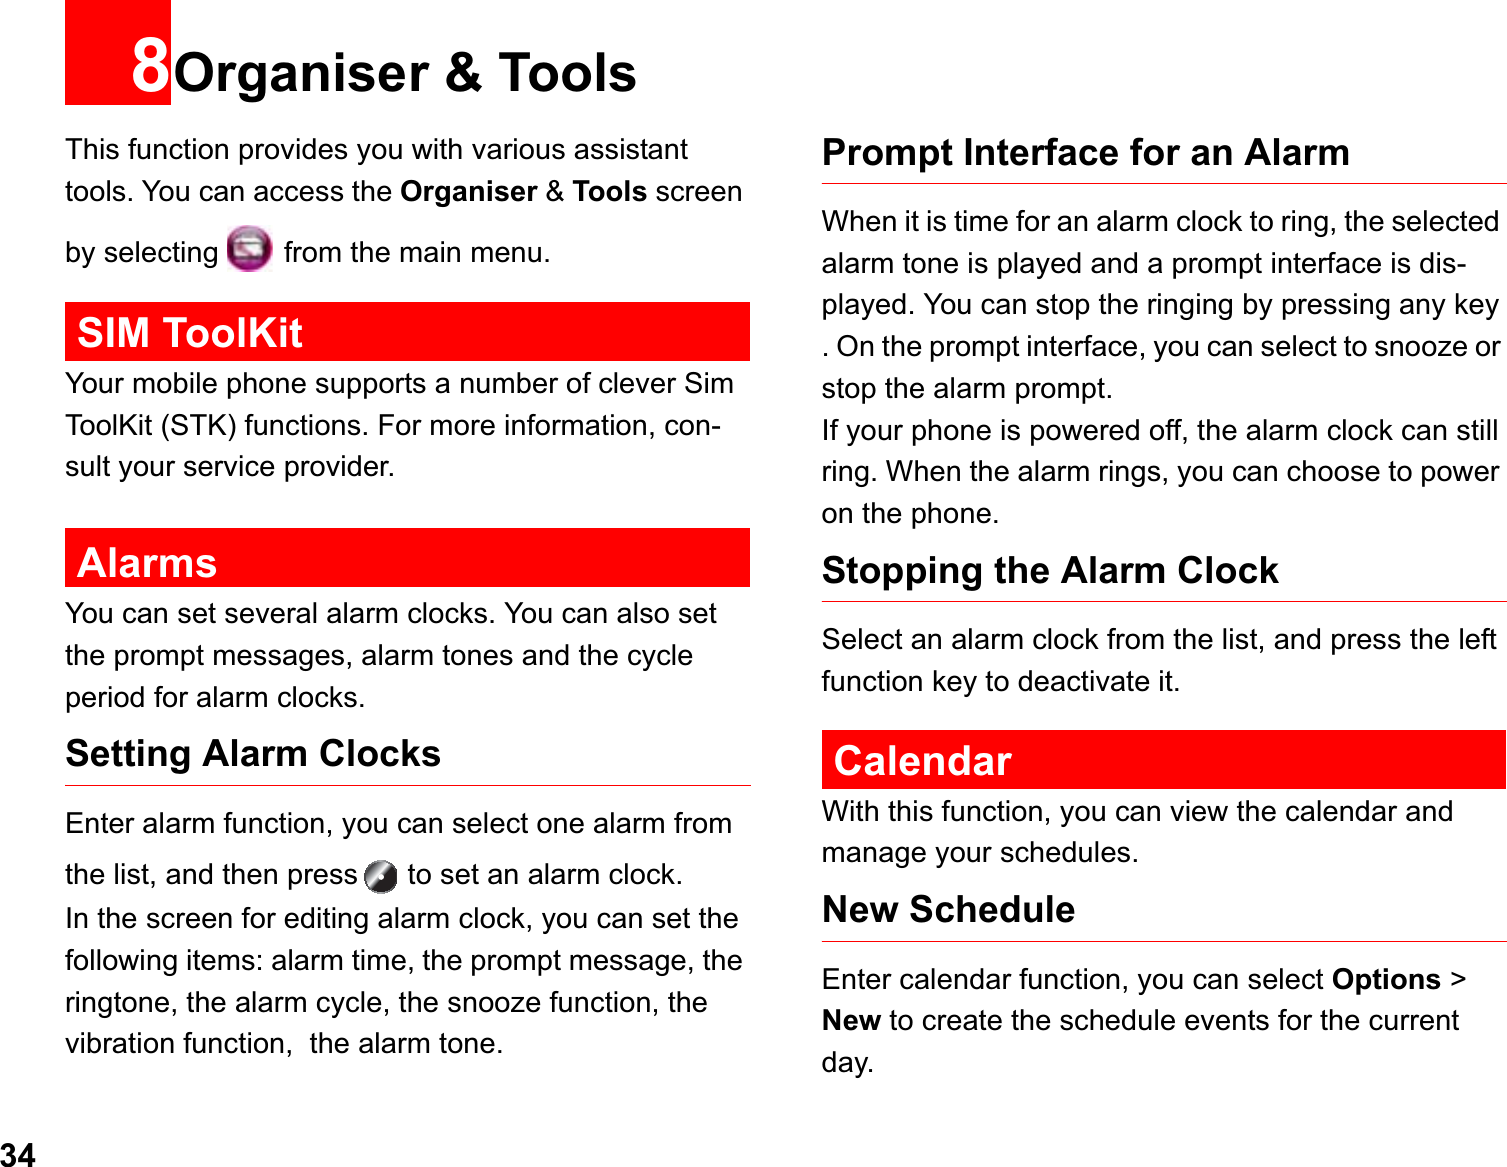 348Organiser &amp; ToolsThis function provides you with various assistant tools. You can access the Organiser &amp; Tools screen by selecting   from the main menu.SIM ToolKitYour mobile phone supports a number of clever Sim ToolKit (STK) functions. For more information, con-sult your service provider. AlarmsYou can set several alarm clocks. You can also set the prompt messages, alarm tones and the cycle period for alarm clocks.  Setting Alarm ClocksEnter alarm function, you can select one alarm from the list, and then press  to set an alarm clock.In the screen for editing alarm clock, you can set the following items: alarm time, the prompt message, the ringtone, the alarm cycle, the snooze function, the vibration function,  the alarm tone.Prompt Interface for an AlarmWhen it is time for an alarm clock to ring, the selected alarm tone is played and a prompt interface is dis-played. You can stop the ringing by pressing any key . On the prompt interface, you can select to snooze or stop the alarm prompt.If your phone is powered off, the alarm clock can still ring. When the alarm rings, you can choose to power on the phone.Stopping the Alarm ClockSelect an alarm clock from the list, and press the left function key to deactivate it.CalendarWith this function, you can view the calendar and manage your schedules.New ScheduleEnter calendar function, you can select Options &gt; New to create the schedule events for the current day.